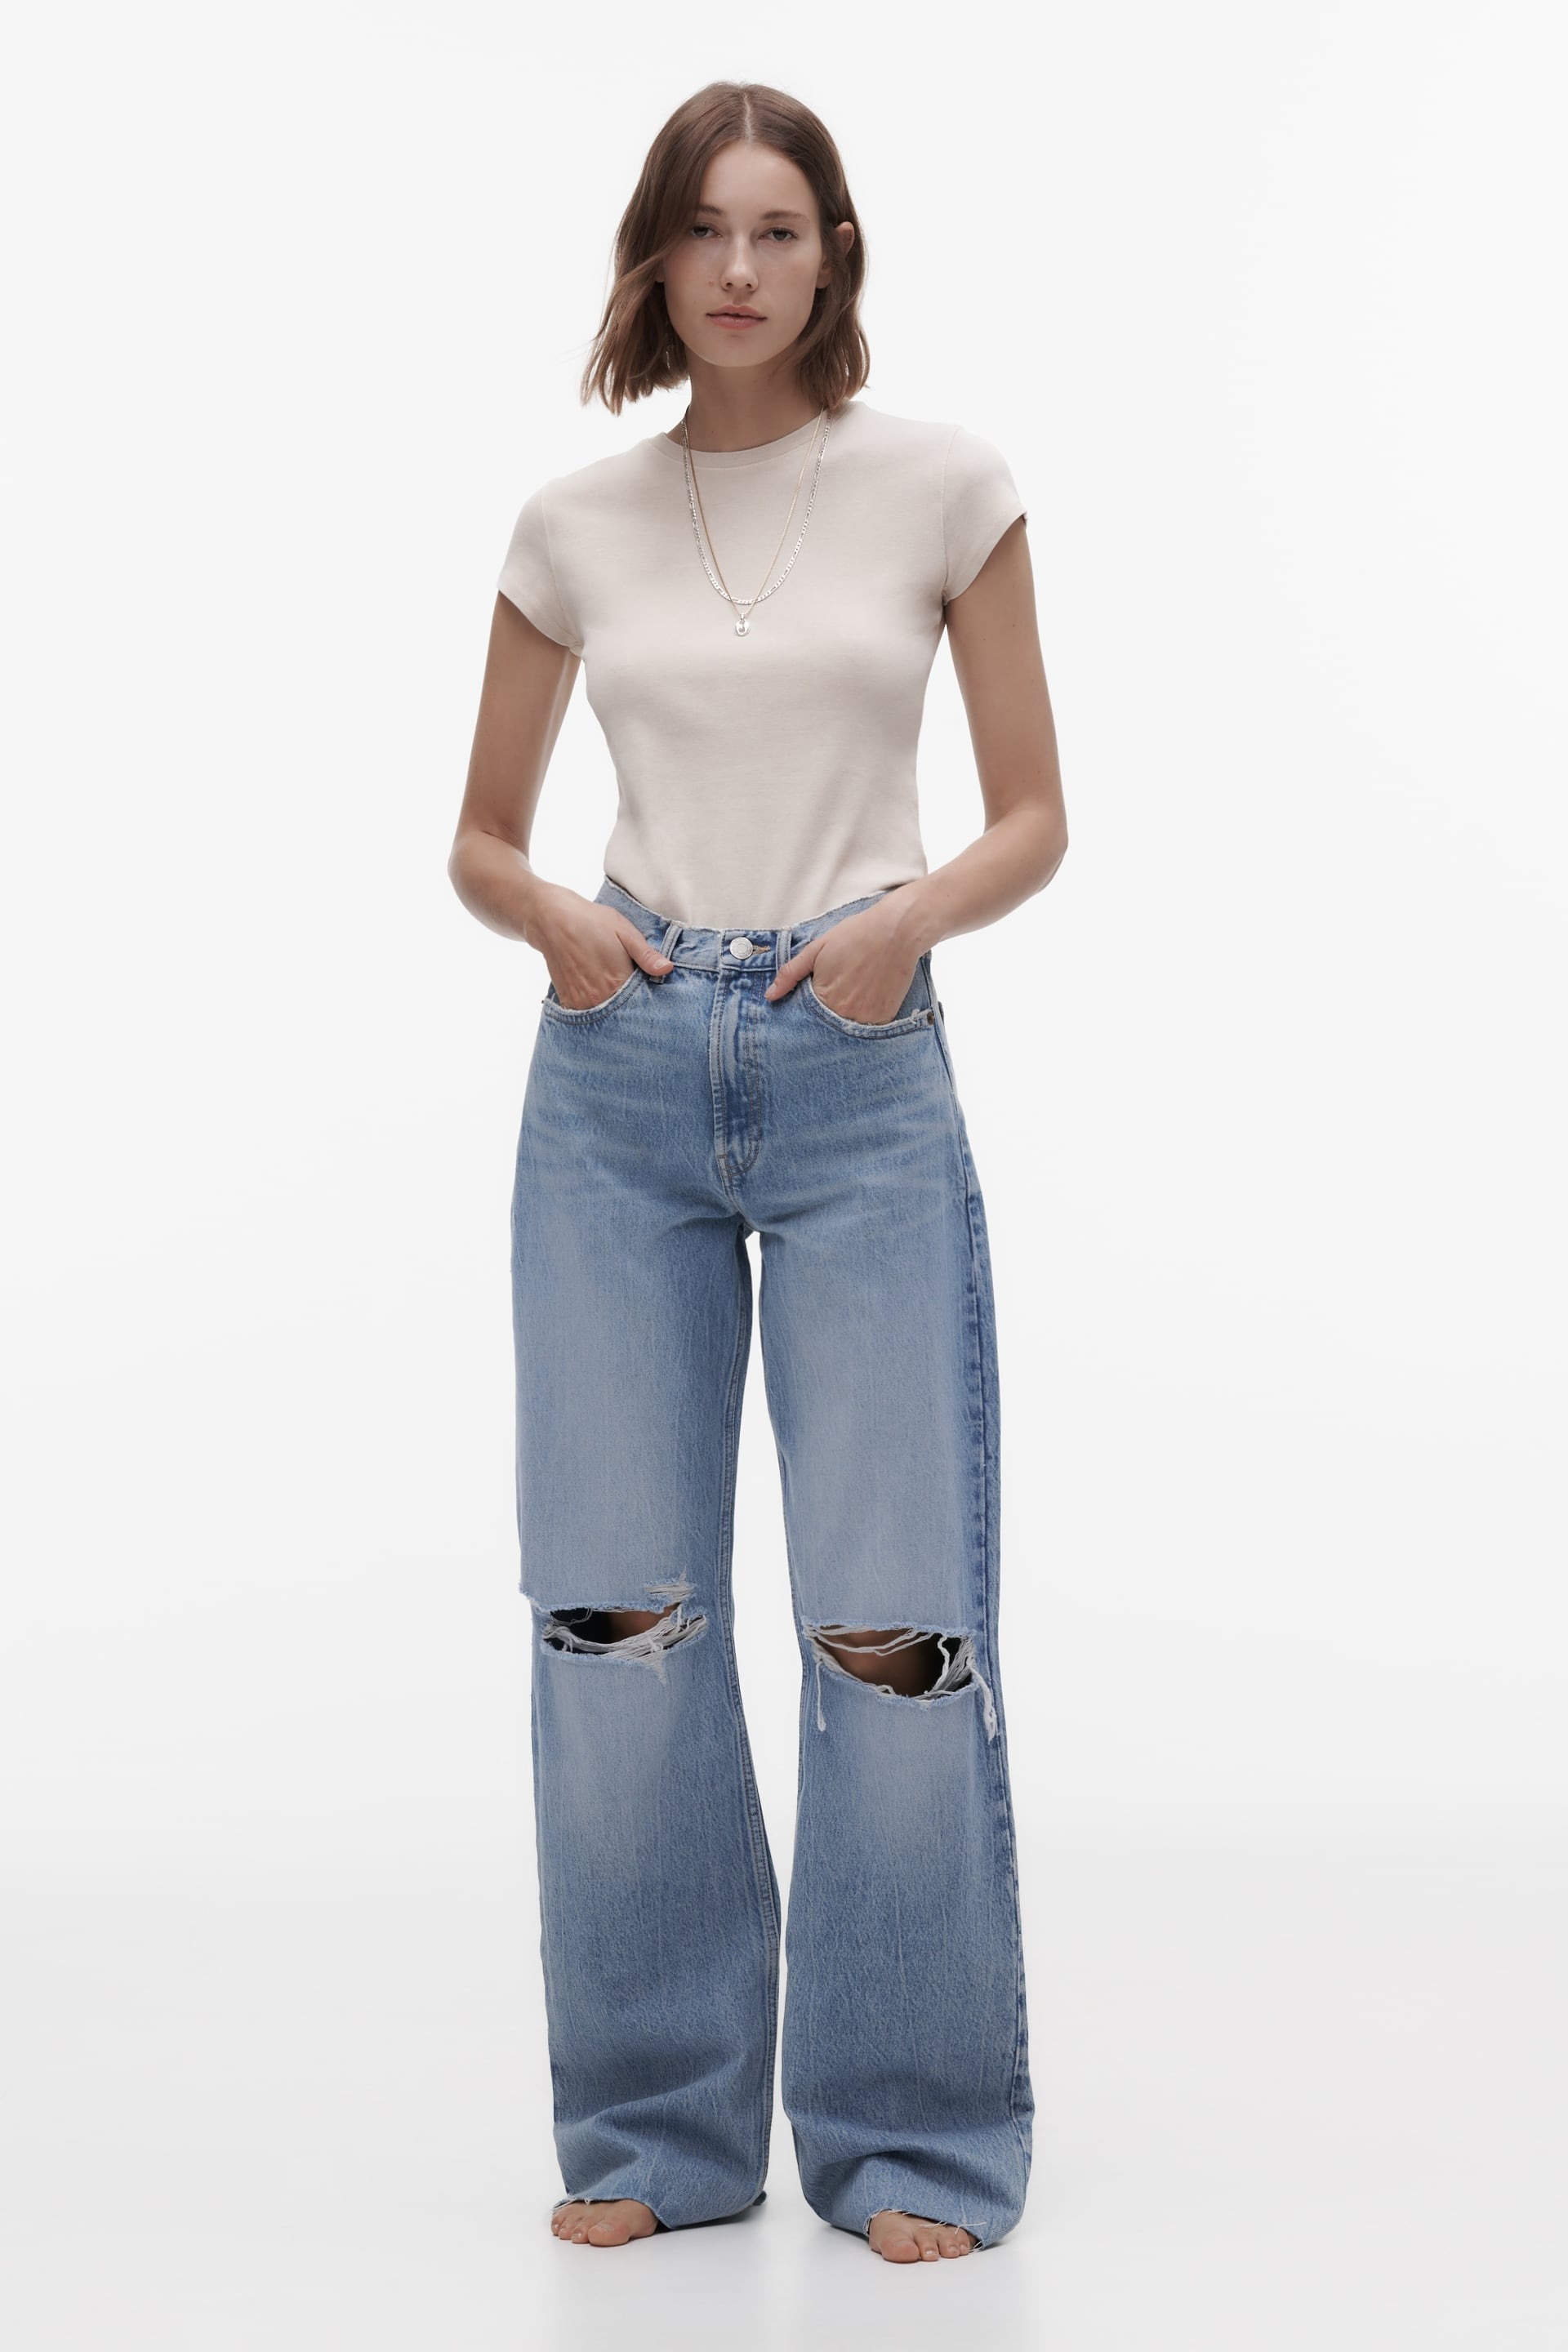 Historicus Concessie Literatuur Everything You Should Know Before Buying Zara Jeans | Who What Wear